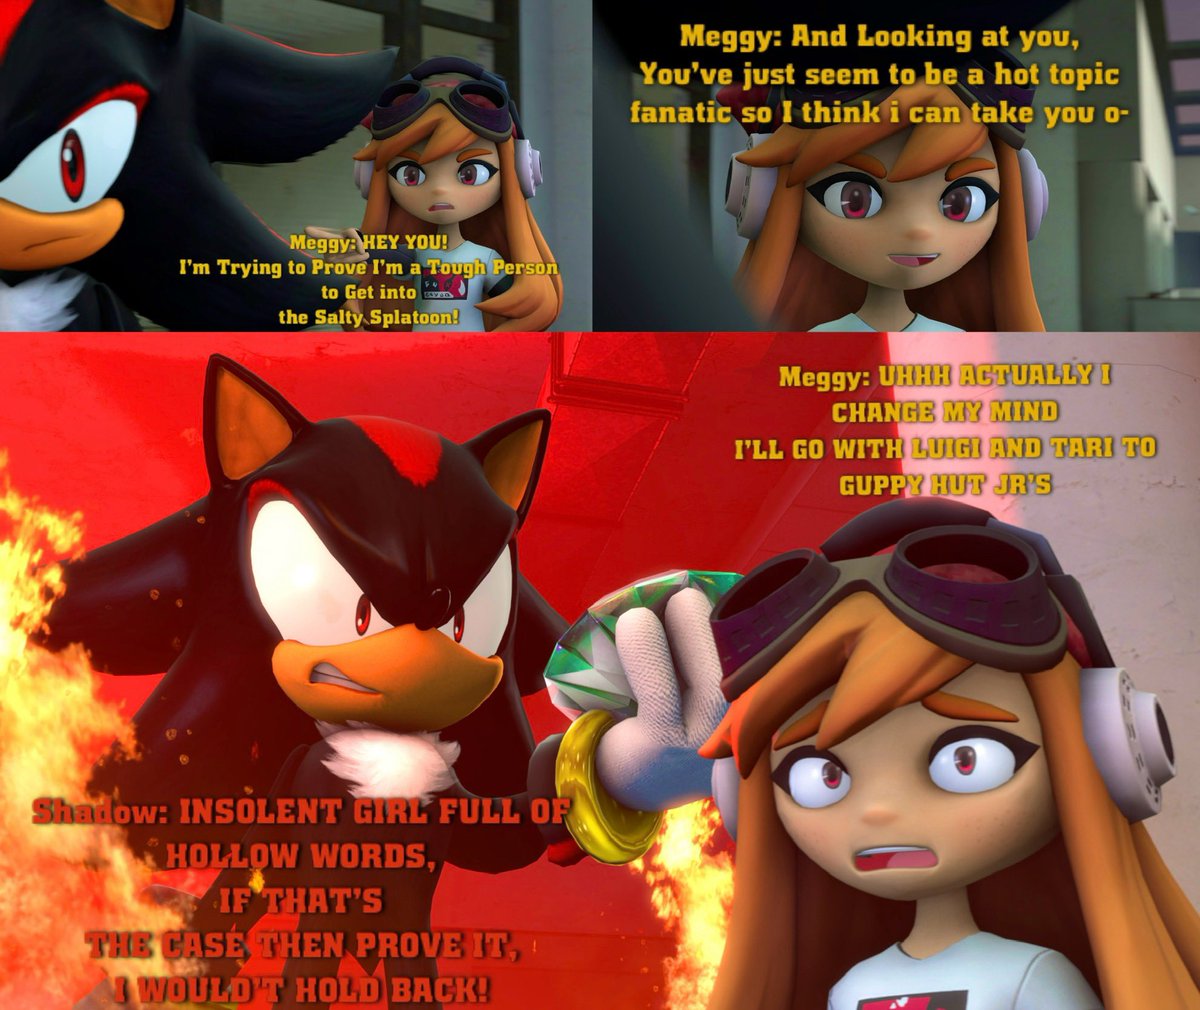 Meggy tries to prove how tough she is
However she picked the wrong guy to fight

#smg4 #smg4meggy #meggysmg4 #meggyspletzer